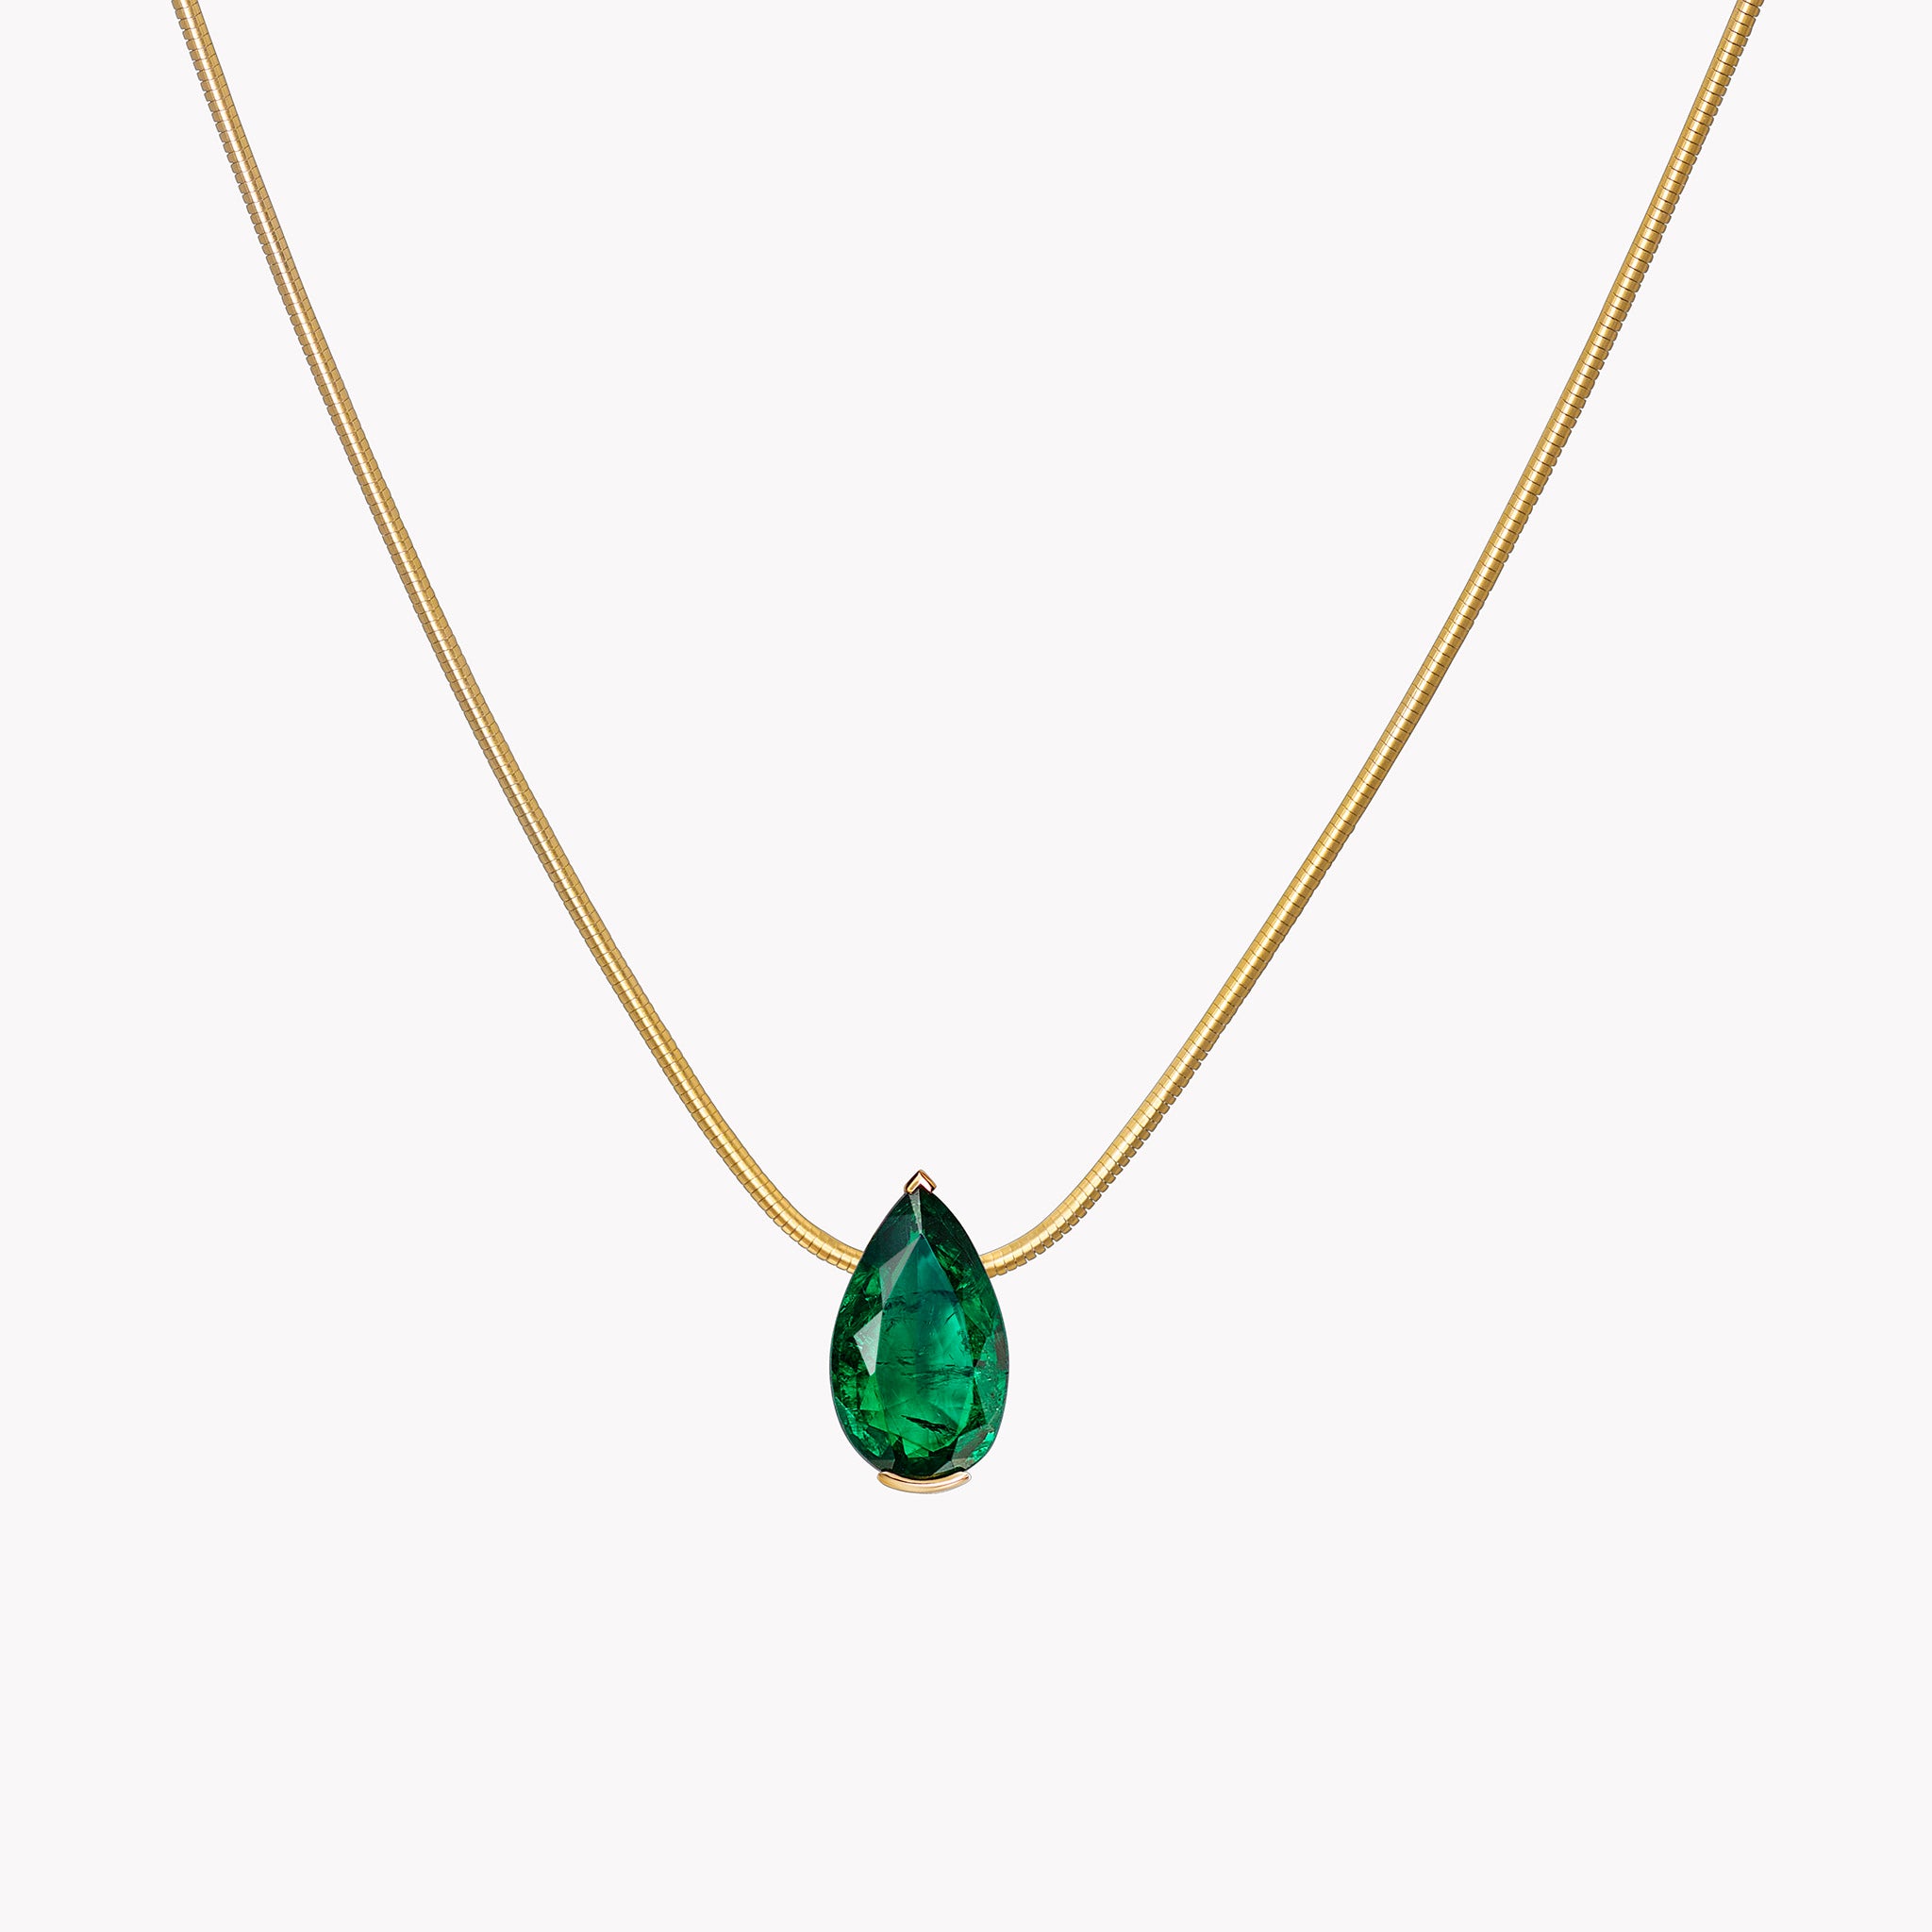 The MG Muse Emerald Pendant